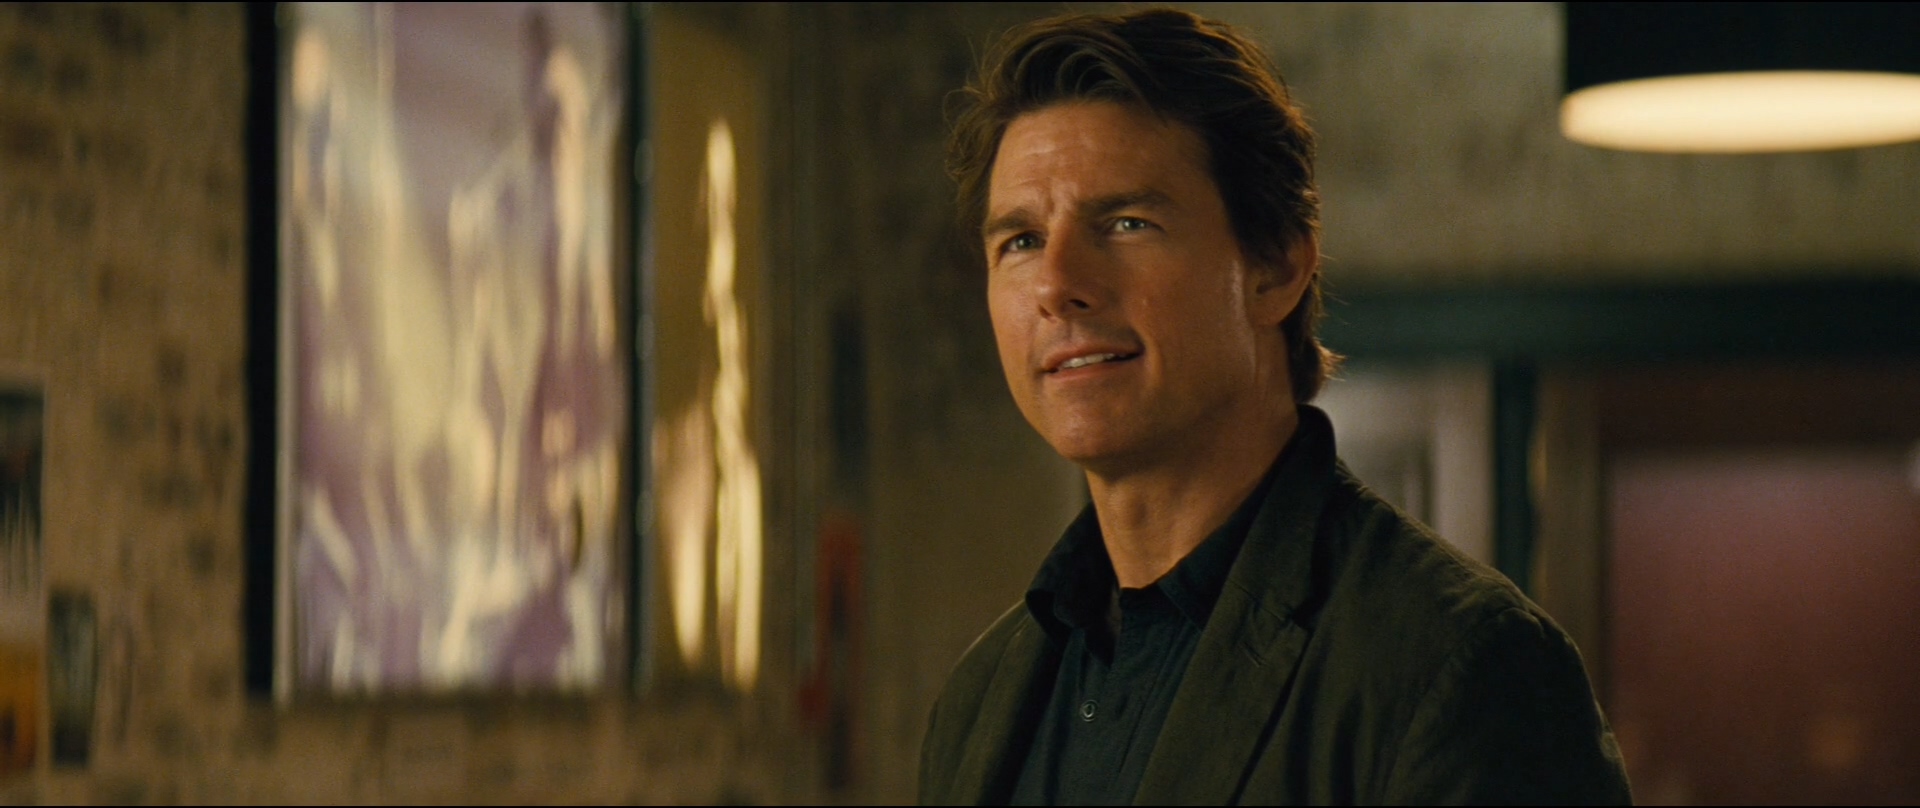 mission_impossible_rogue_nation_191530_365.jpg